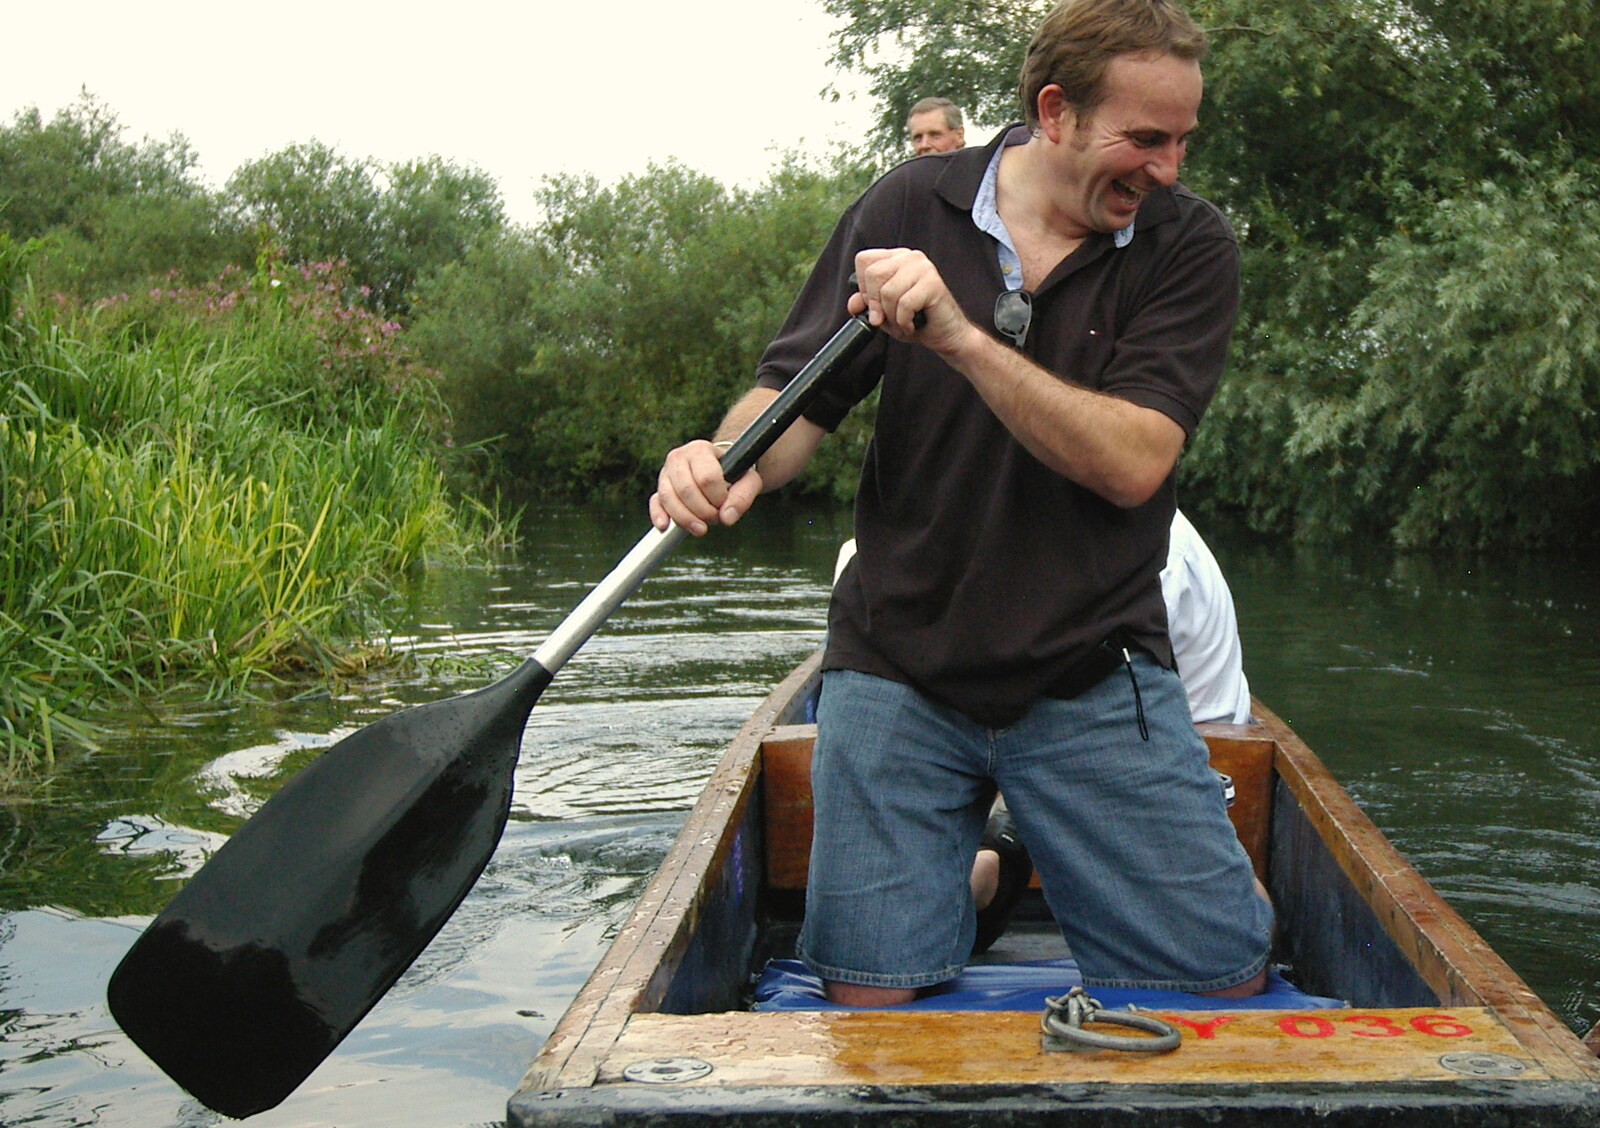 More Peter paddling from Qualcomm goes Punting on the Cam, Grantchester Meadows, Cambridge - 18th August 2005